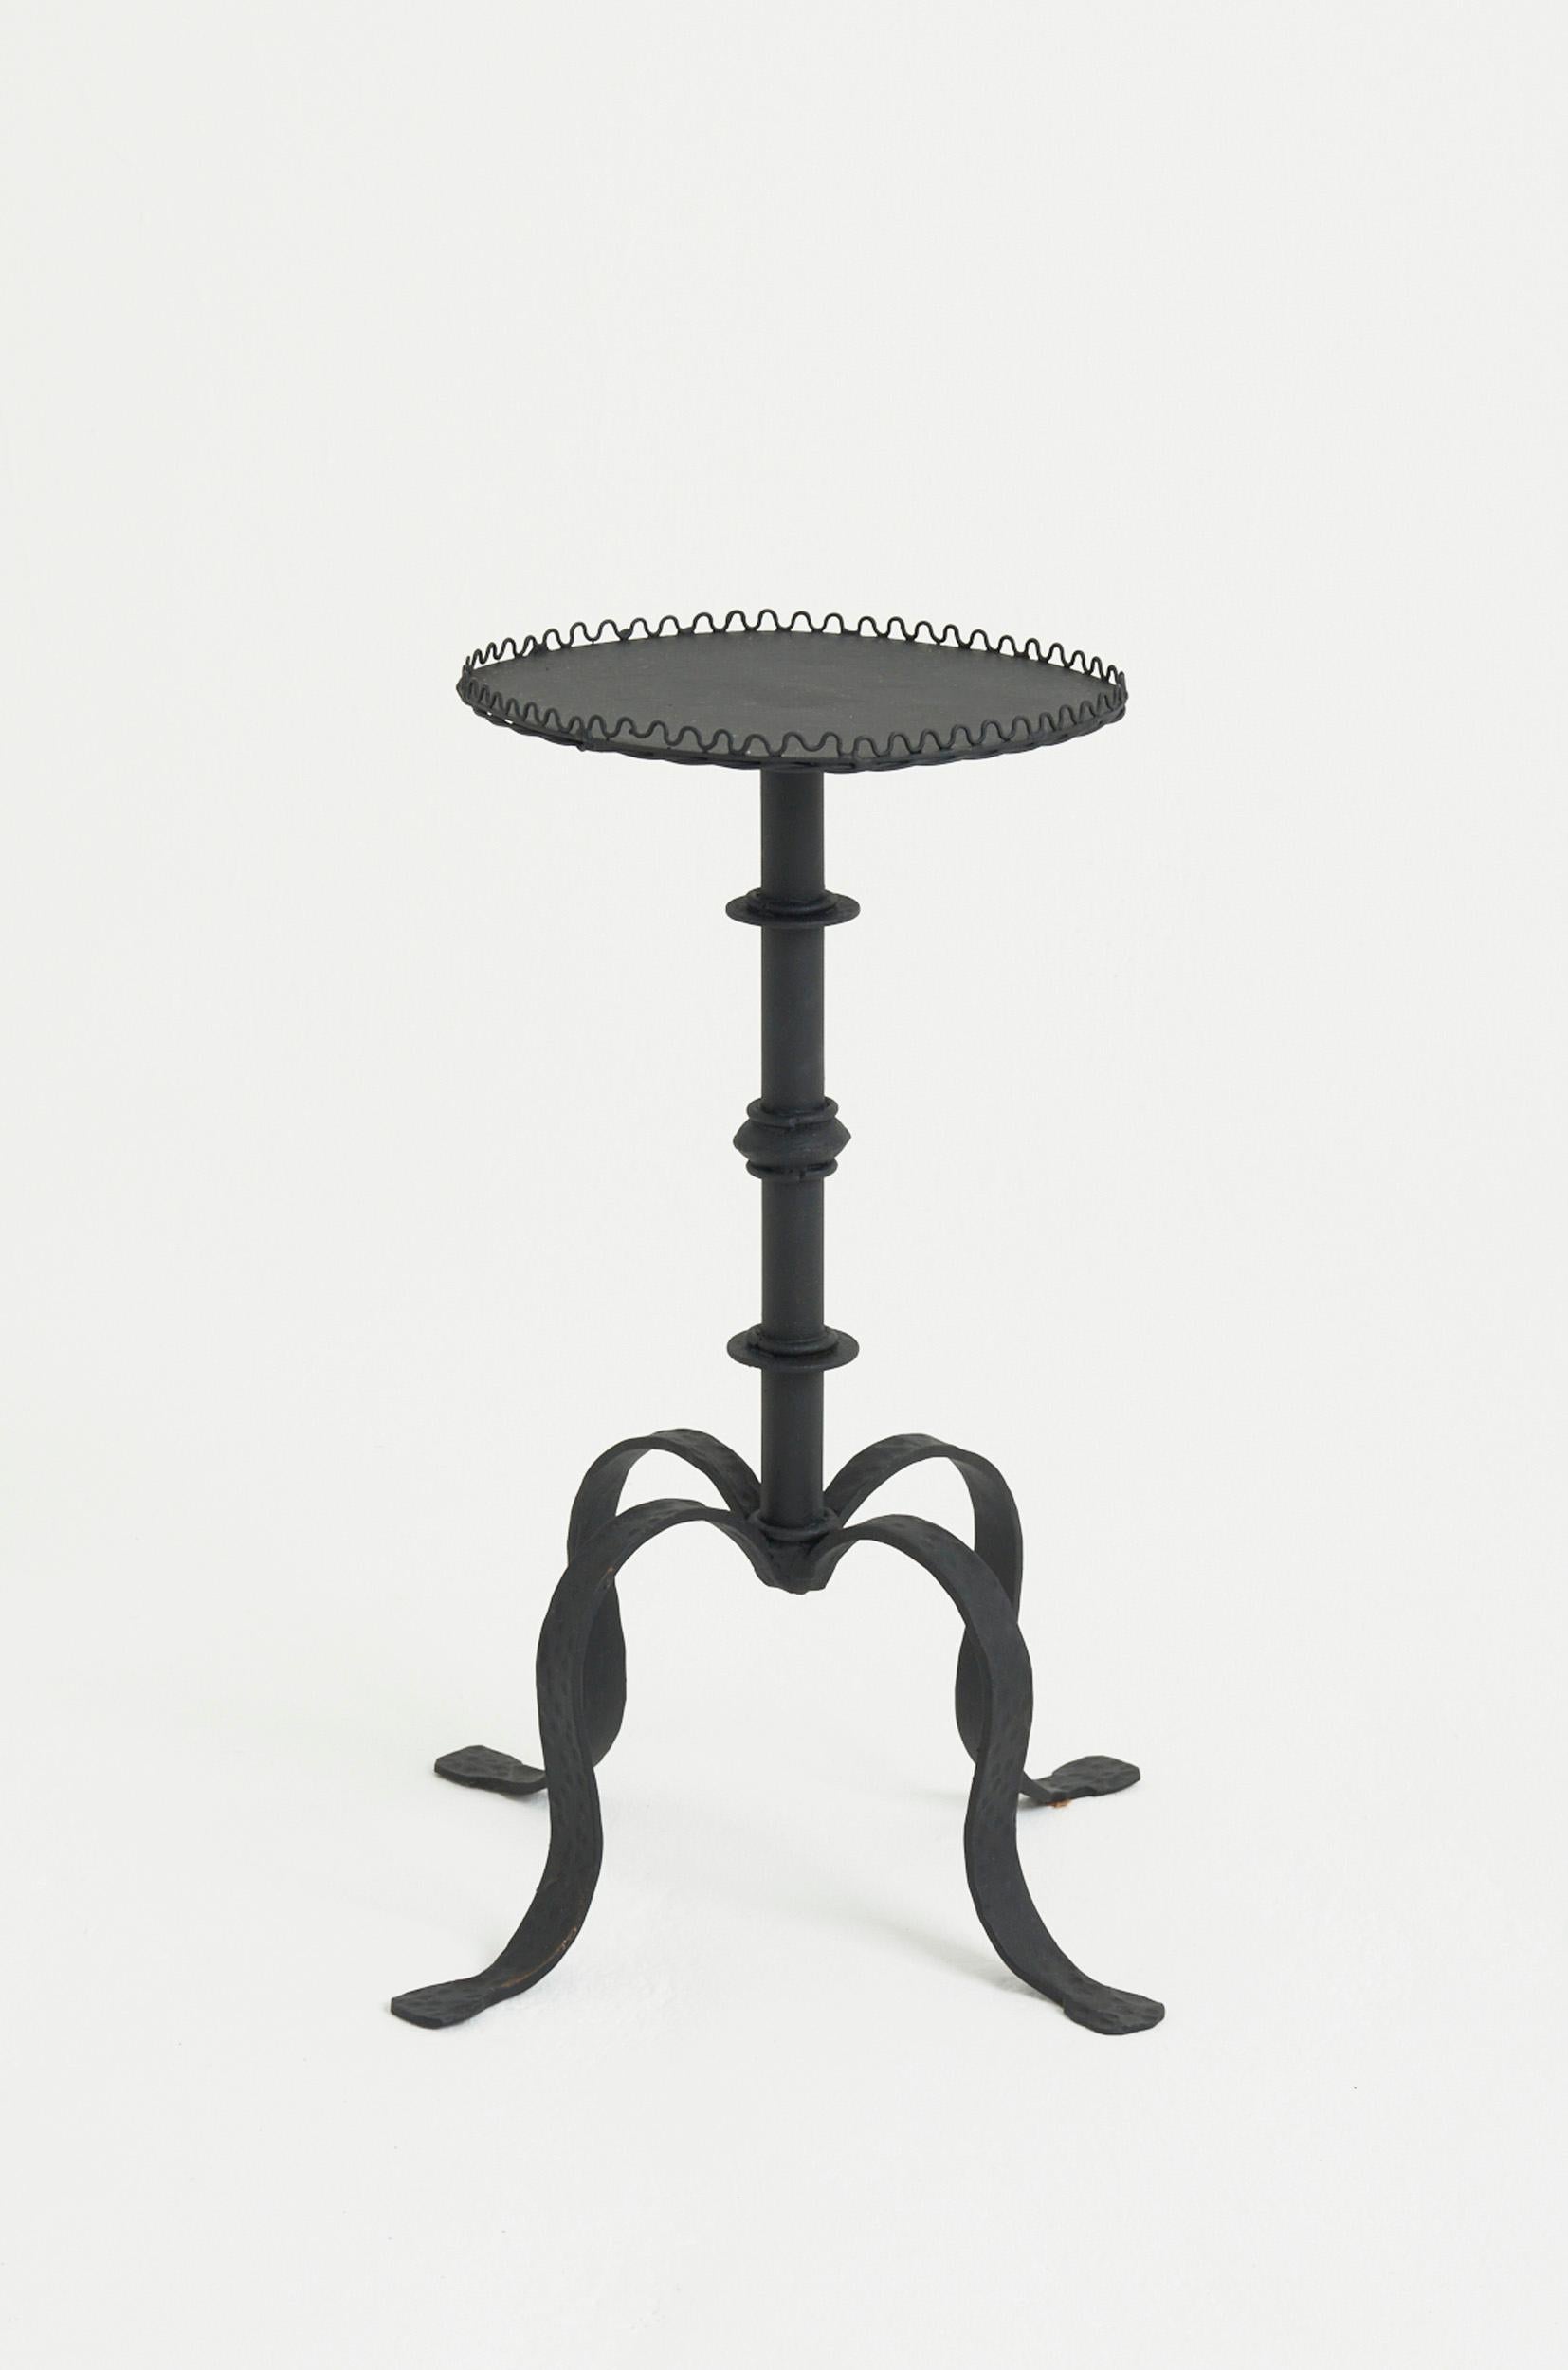 A most unusual oval top black patinated wrought iron martini table.
Spain, mid 20th Century
57.5 cm high by 30 cm wide by 25 cm depth
Martini Base: 35 cm diameter